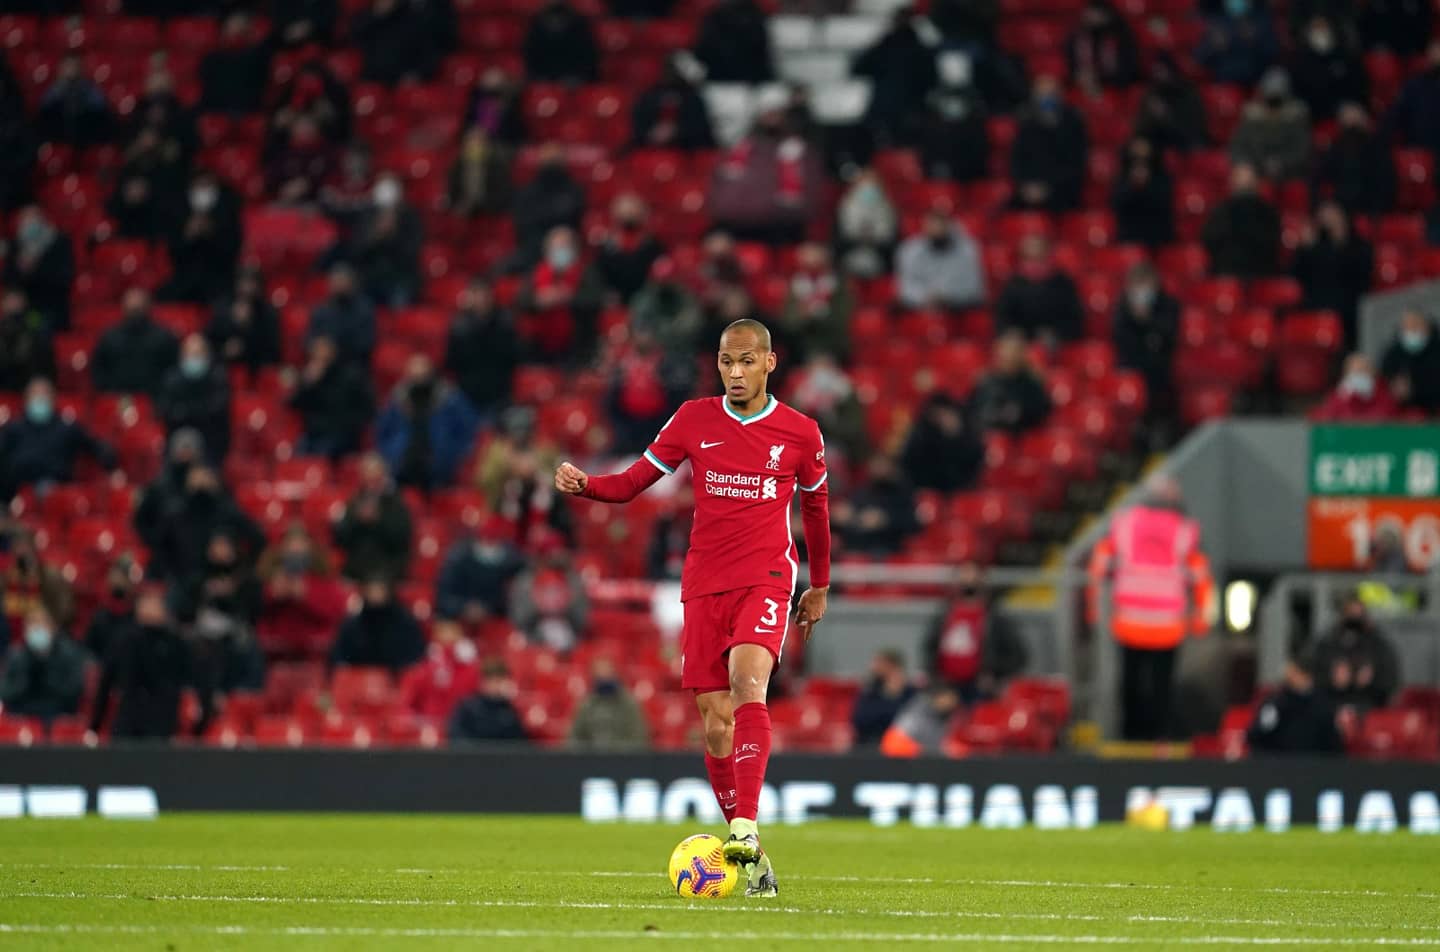 Liverpool don’t pay attention to what other teams are doing, asserts Fabinho